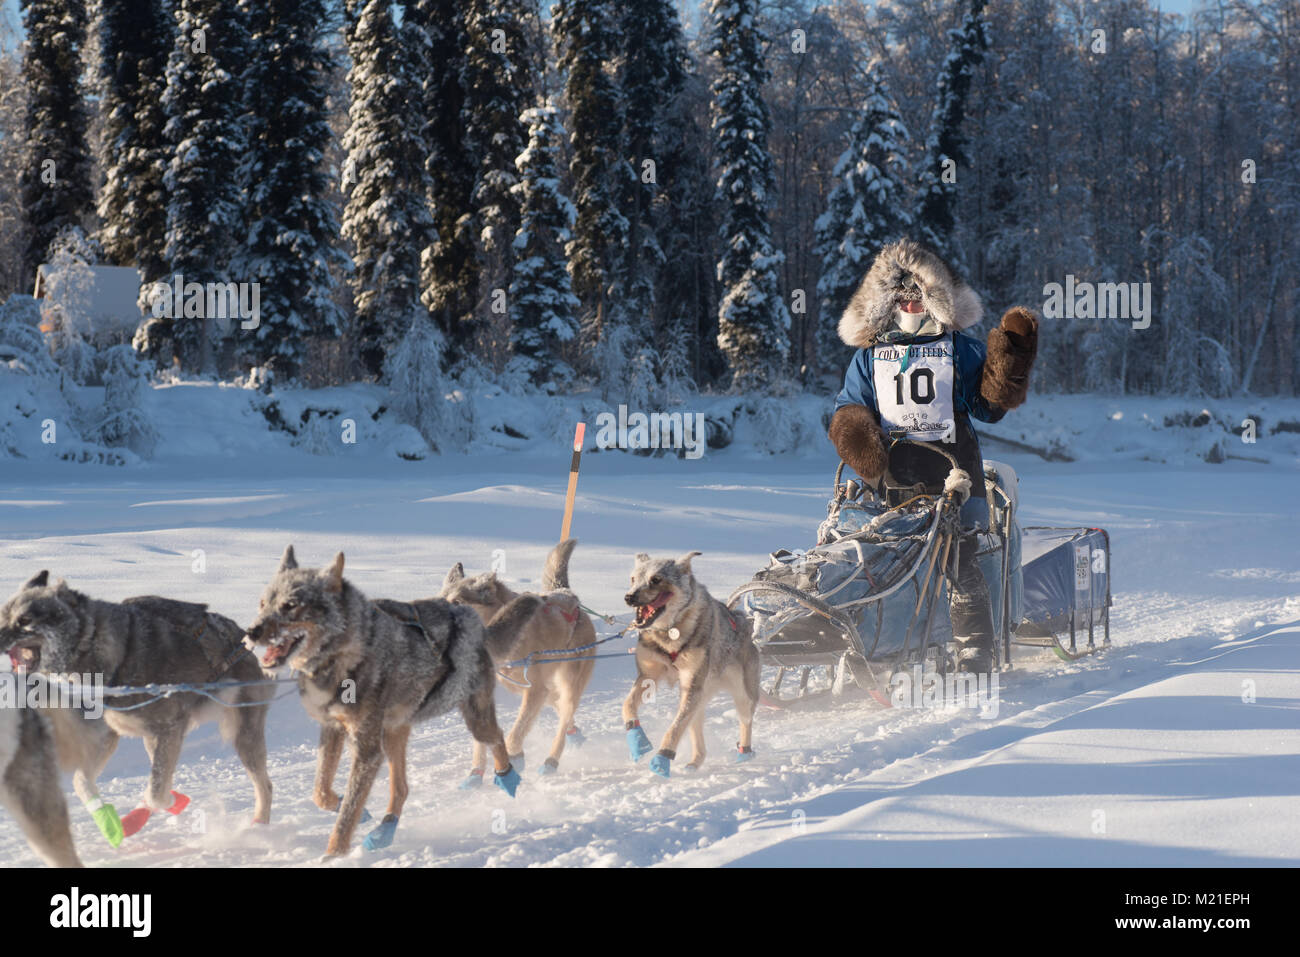 FAIRBANKS, ALASKA - FEBRUARY 3, 2018: Race veteran Paige Drobny, from Ester, AK, waives to race fans as she heads down the trail. Credit: Roger Asbury/Alamy Live News Stock Photo